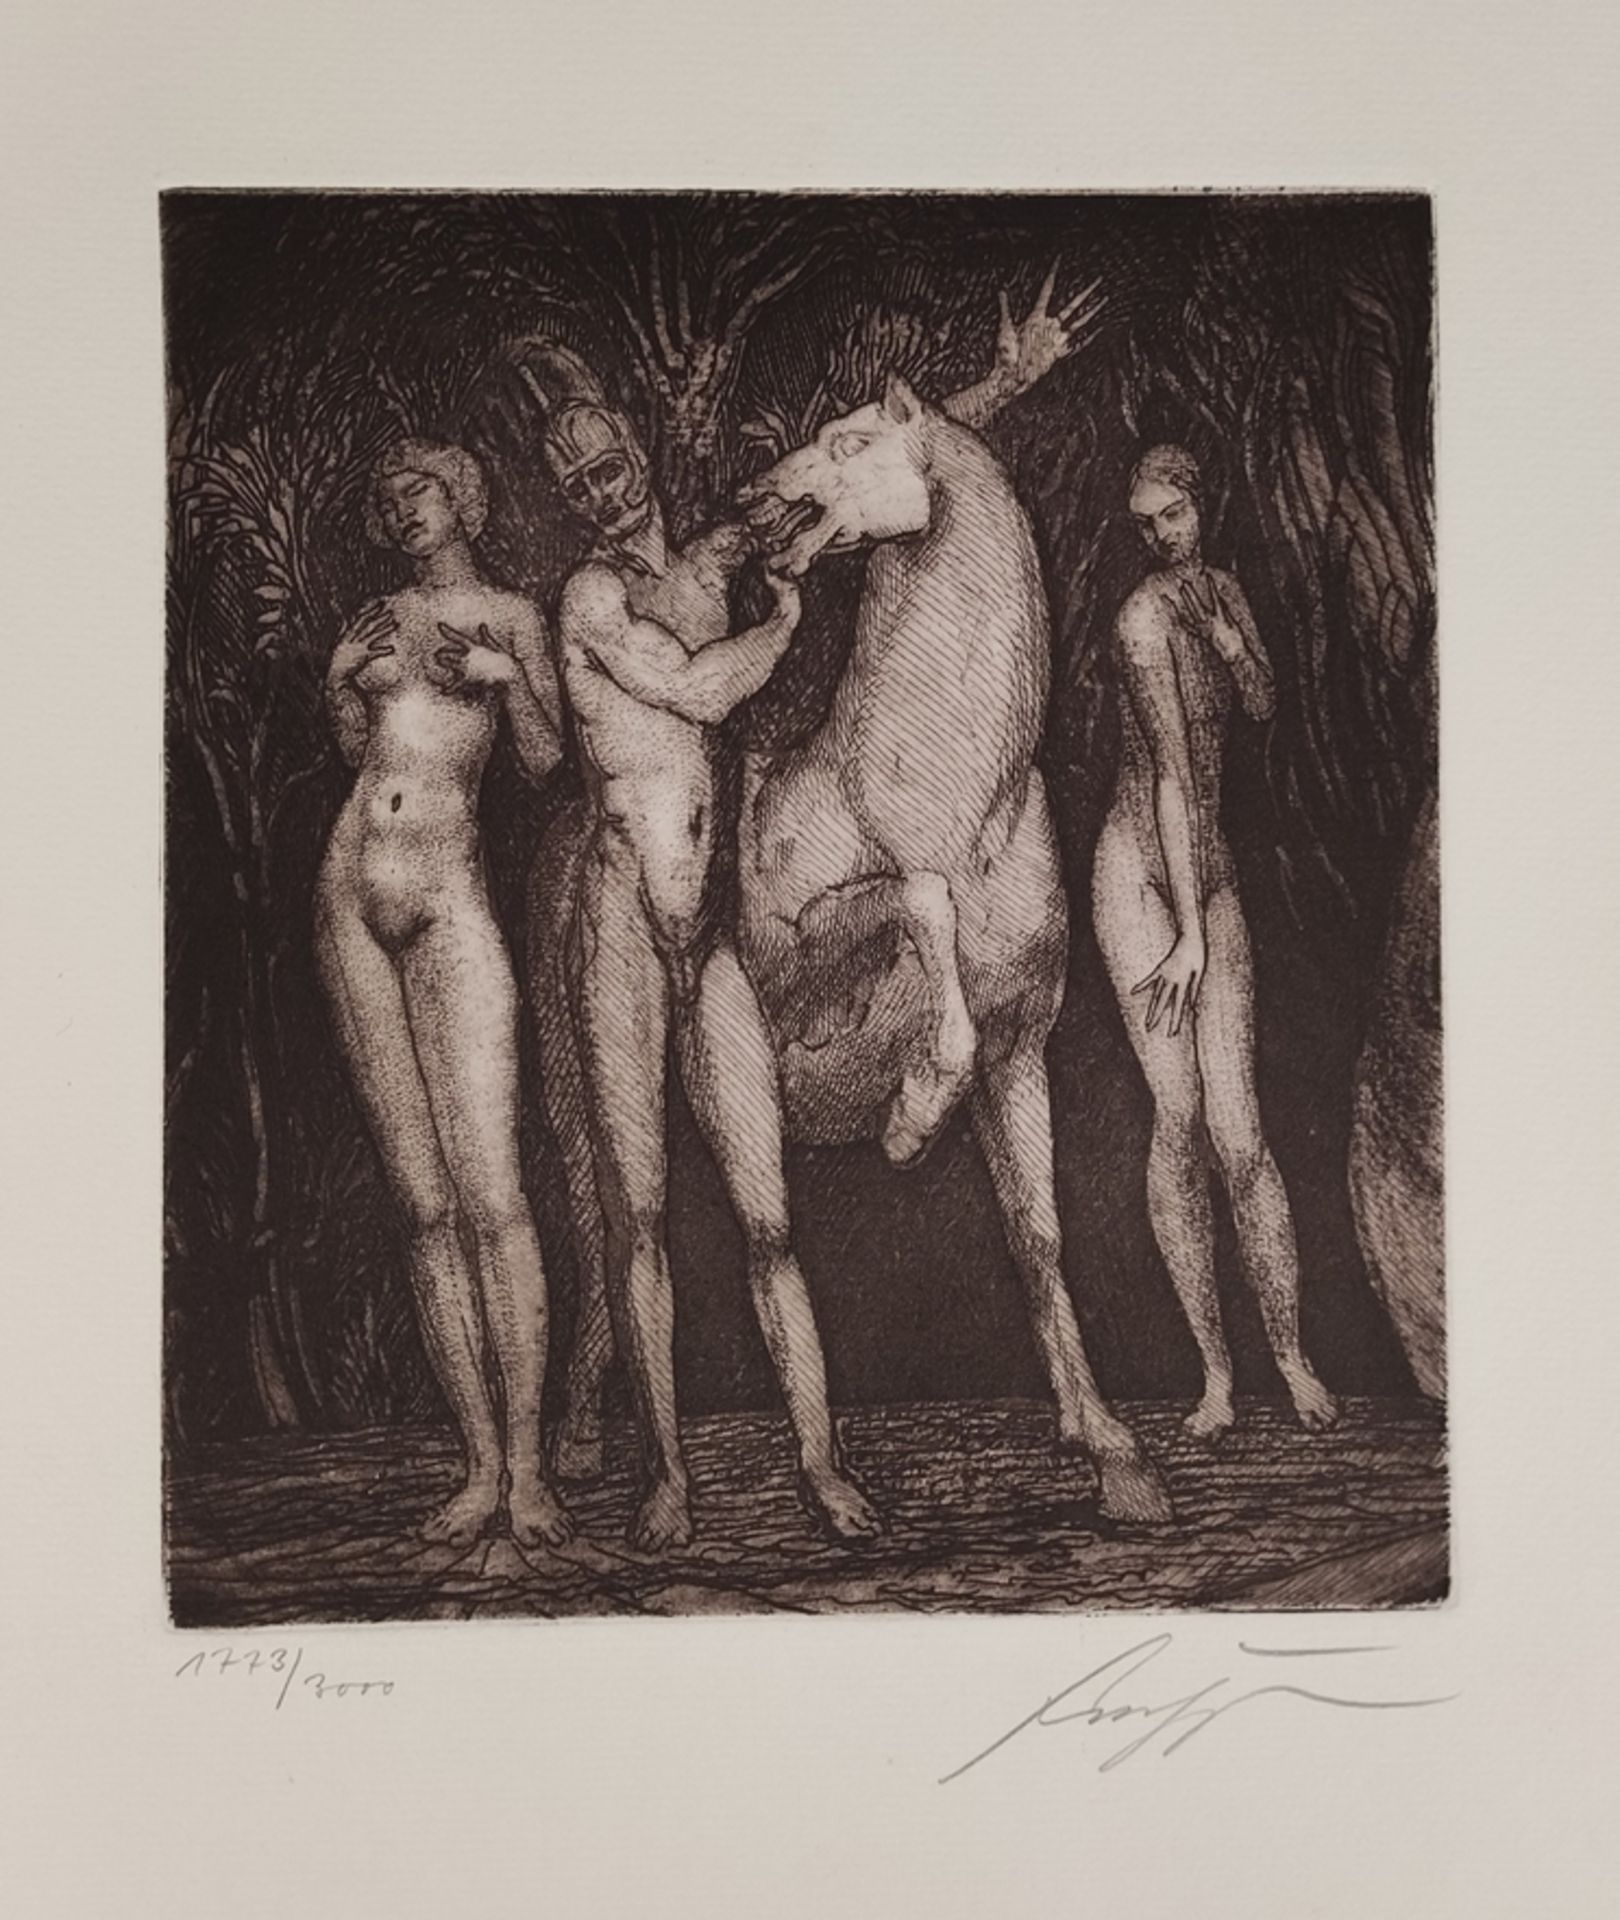 Hartmann, Richard P. (ed.) "Fuchs on Ernst Fuchs. Pictures and drawings from 1945- 1976 with an int - Image 8 of 8